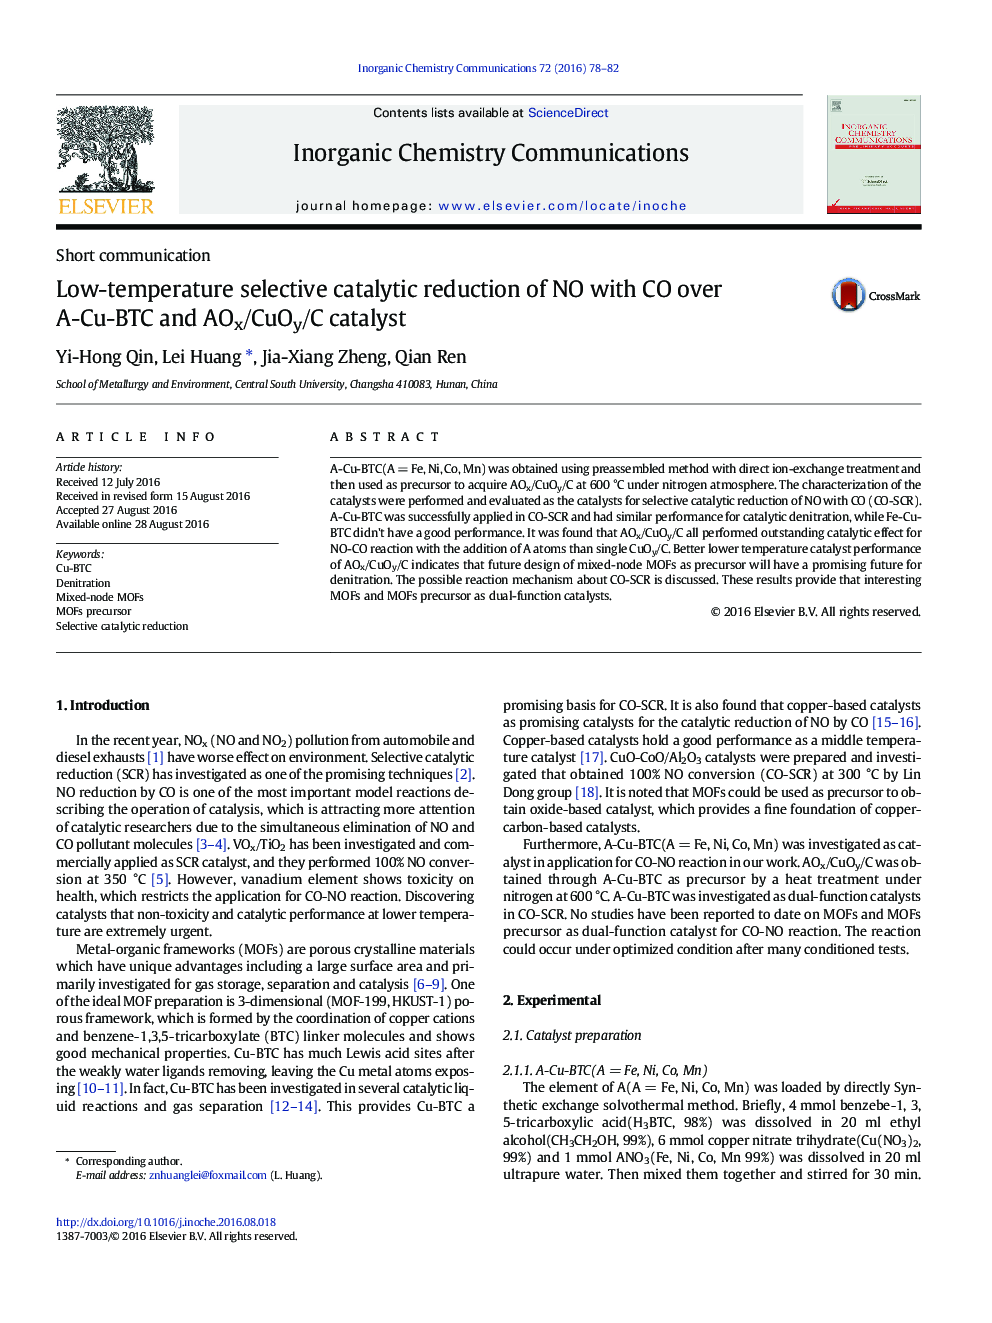 Low-temperature selective catalytic reduction of NO with CO over A-Cu-BTC and AOx/CuOy/C catalyst